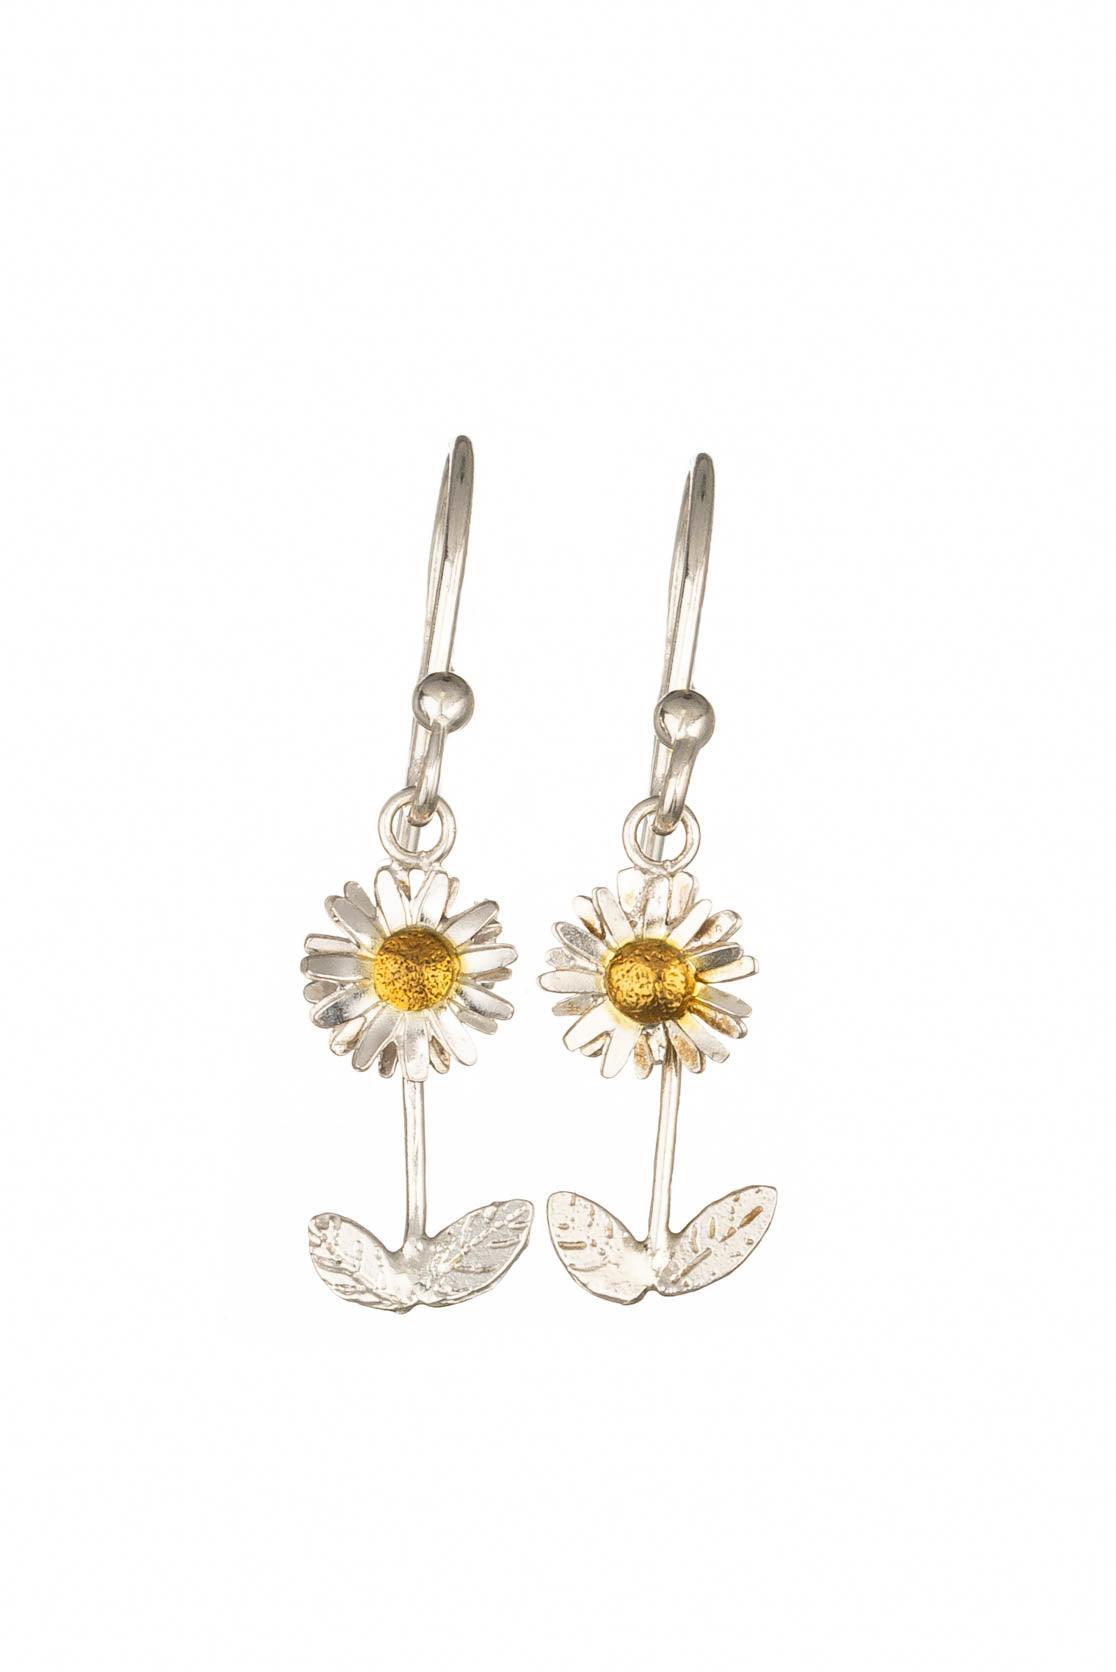 Sterling Silver and Gold Daisy Drop Earrings - Daisy with Stalk on Hooks